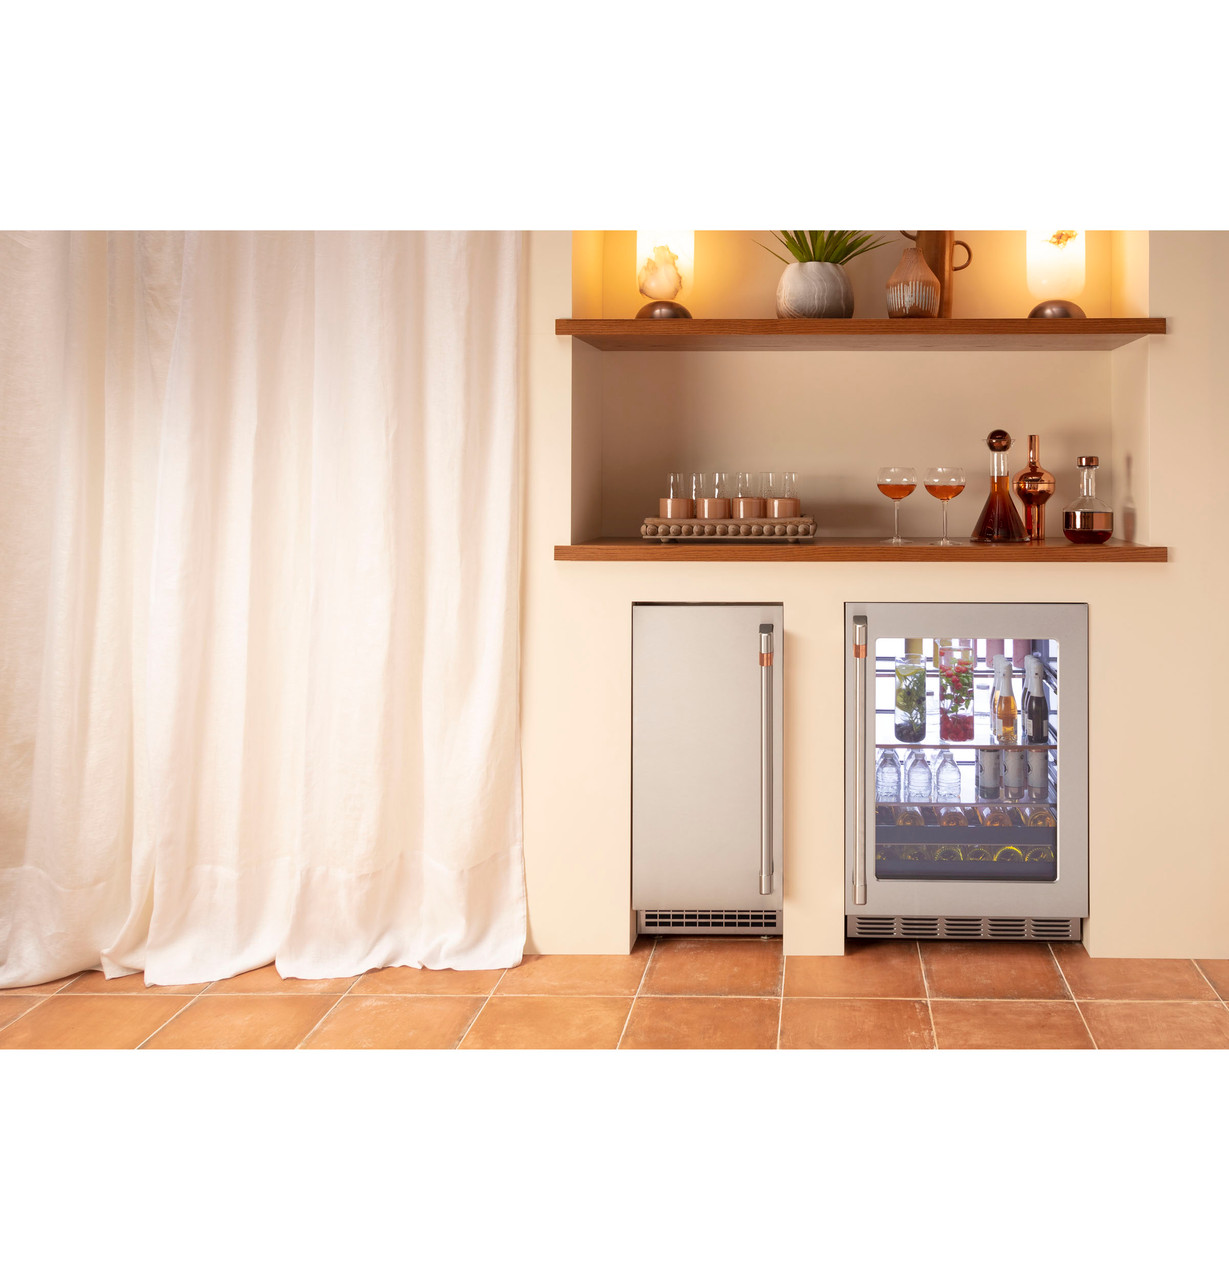 UNC15NPRIIGE Ice Maker 15-Inch - Nugget Ice CUSTOM PANEL AND HANDLE  REQUIRED - Westco Home Furnishings